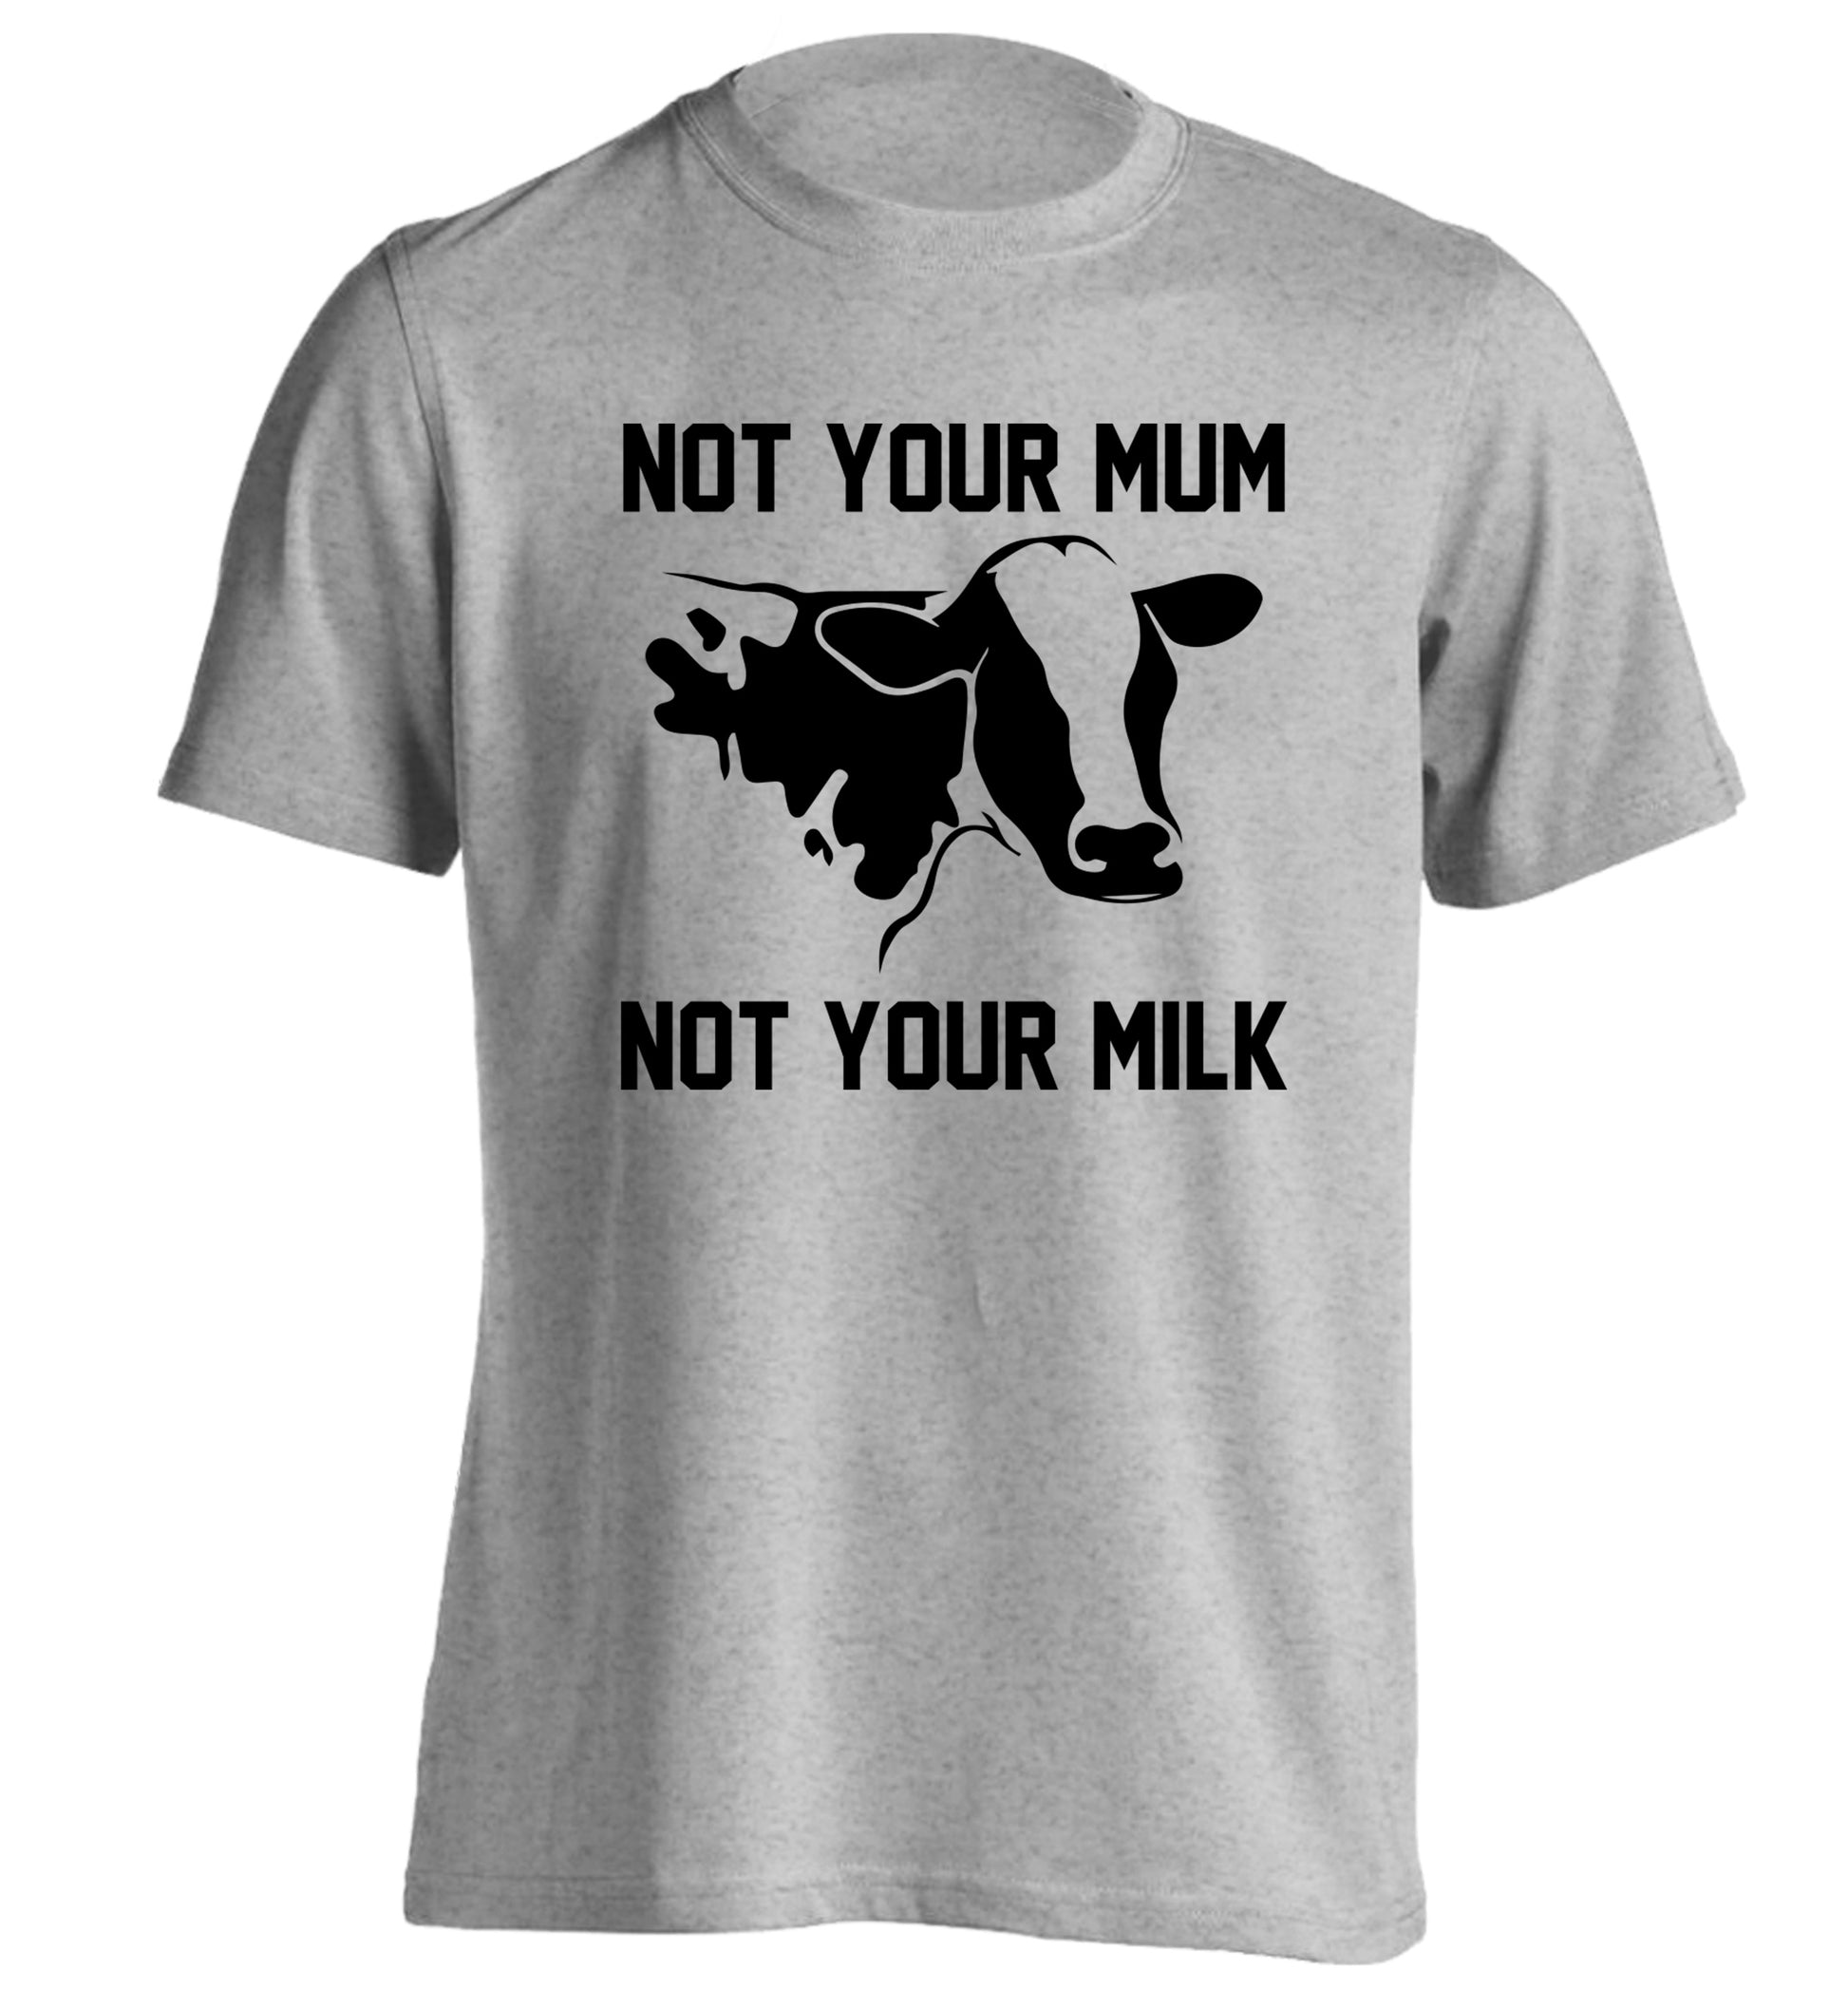 Not your mum not your milk adults unisex grey Tshirt 2XL